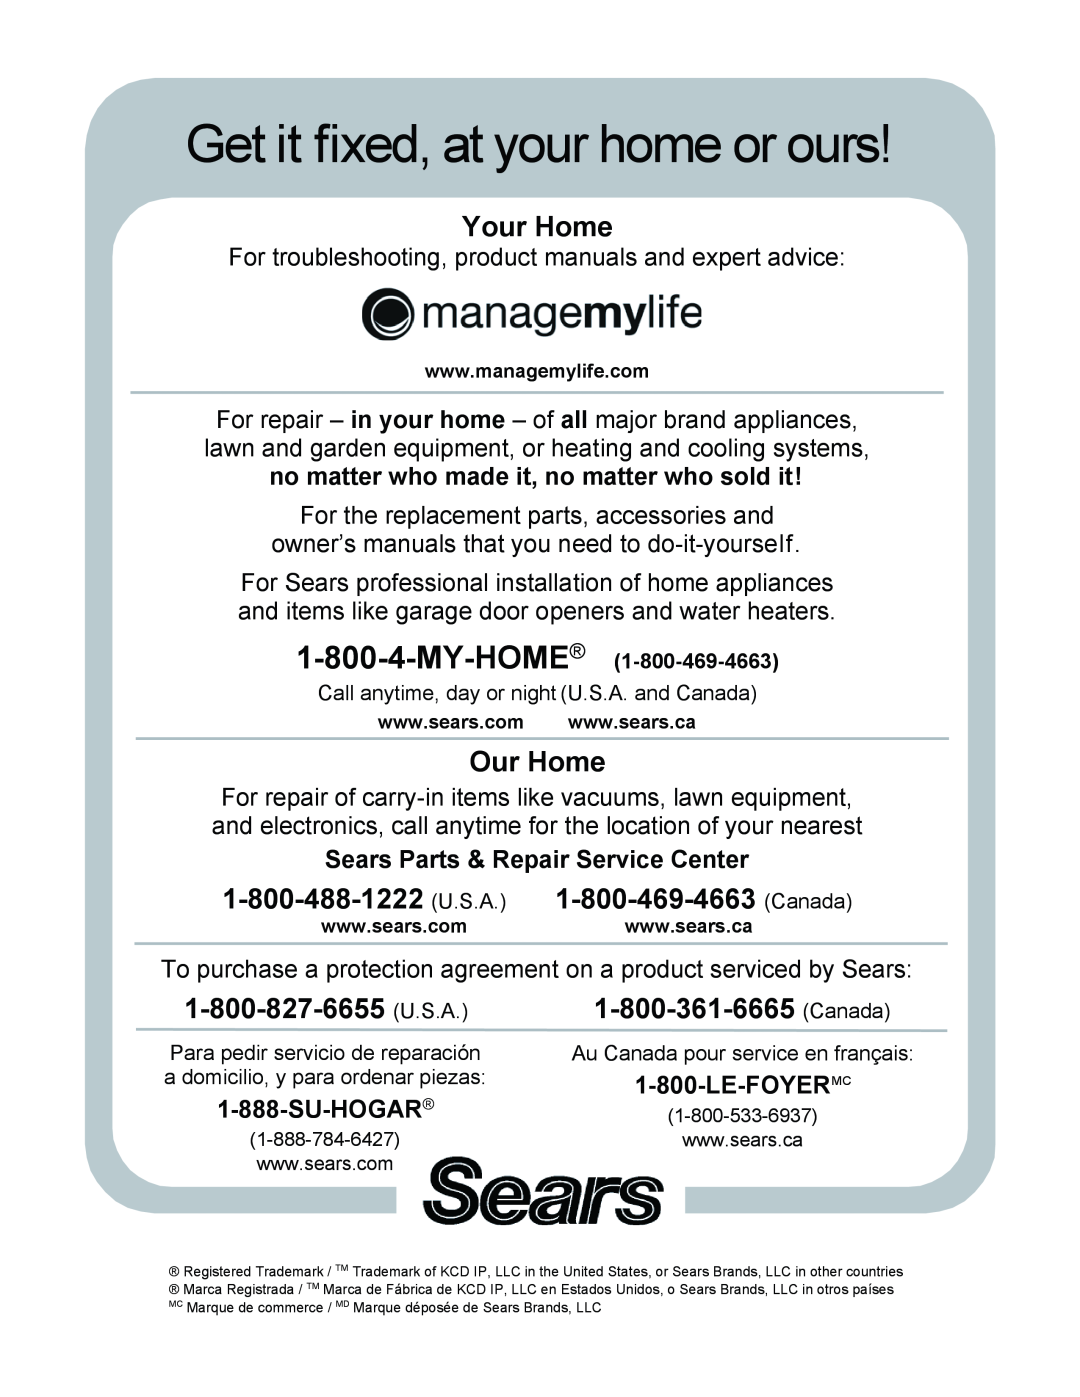 Sears 138.74899 Get it fixed, at your home or ours, Your Home, Our Home, Sears Parts & Repair Service Center, Su-Hogar 